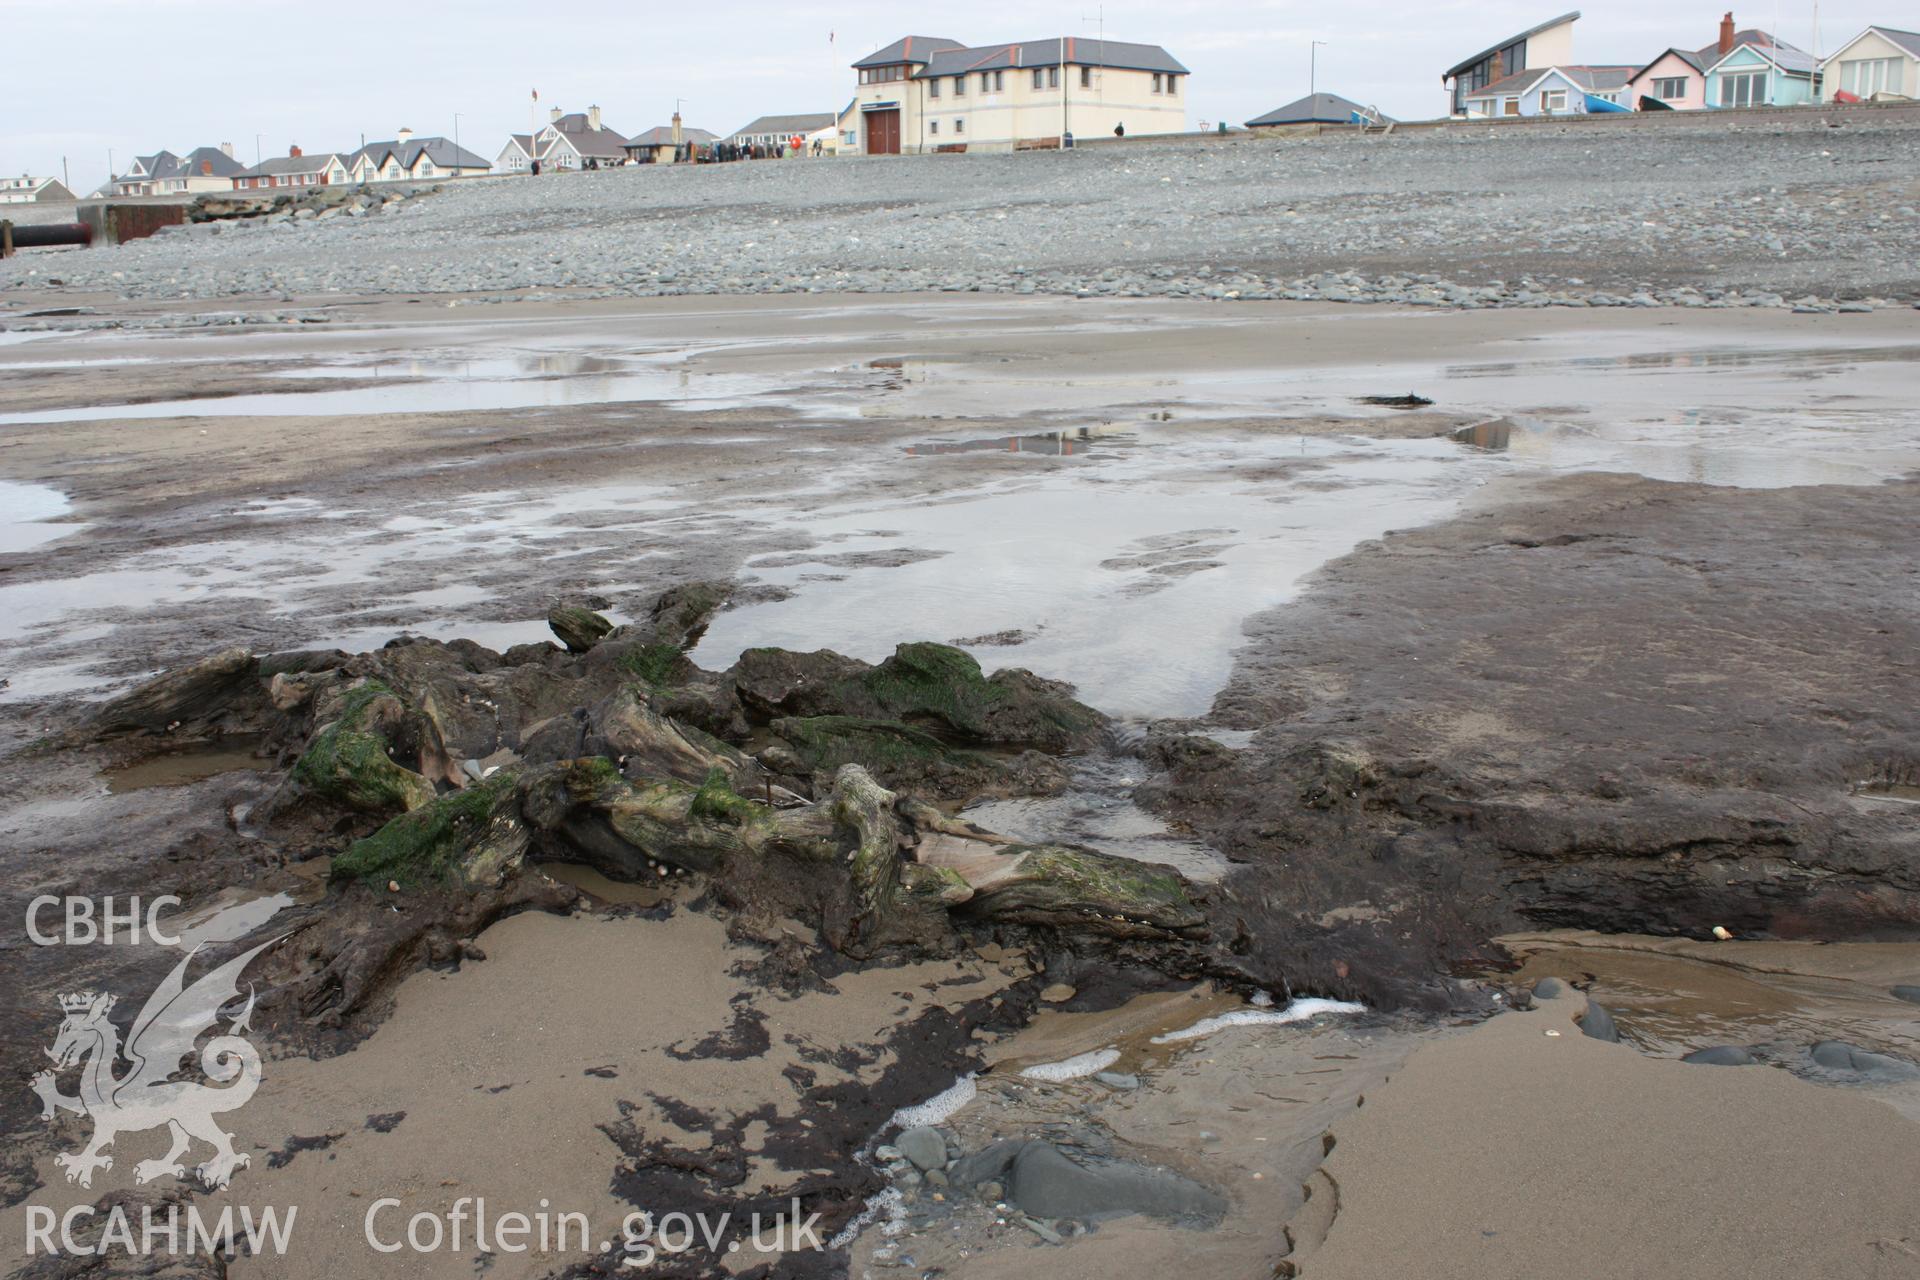 Borth submerged forest (between RNLI lifeboat station and upper Borth), looking east towards High Street. Showing peat deposits with preserved tree remains